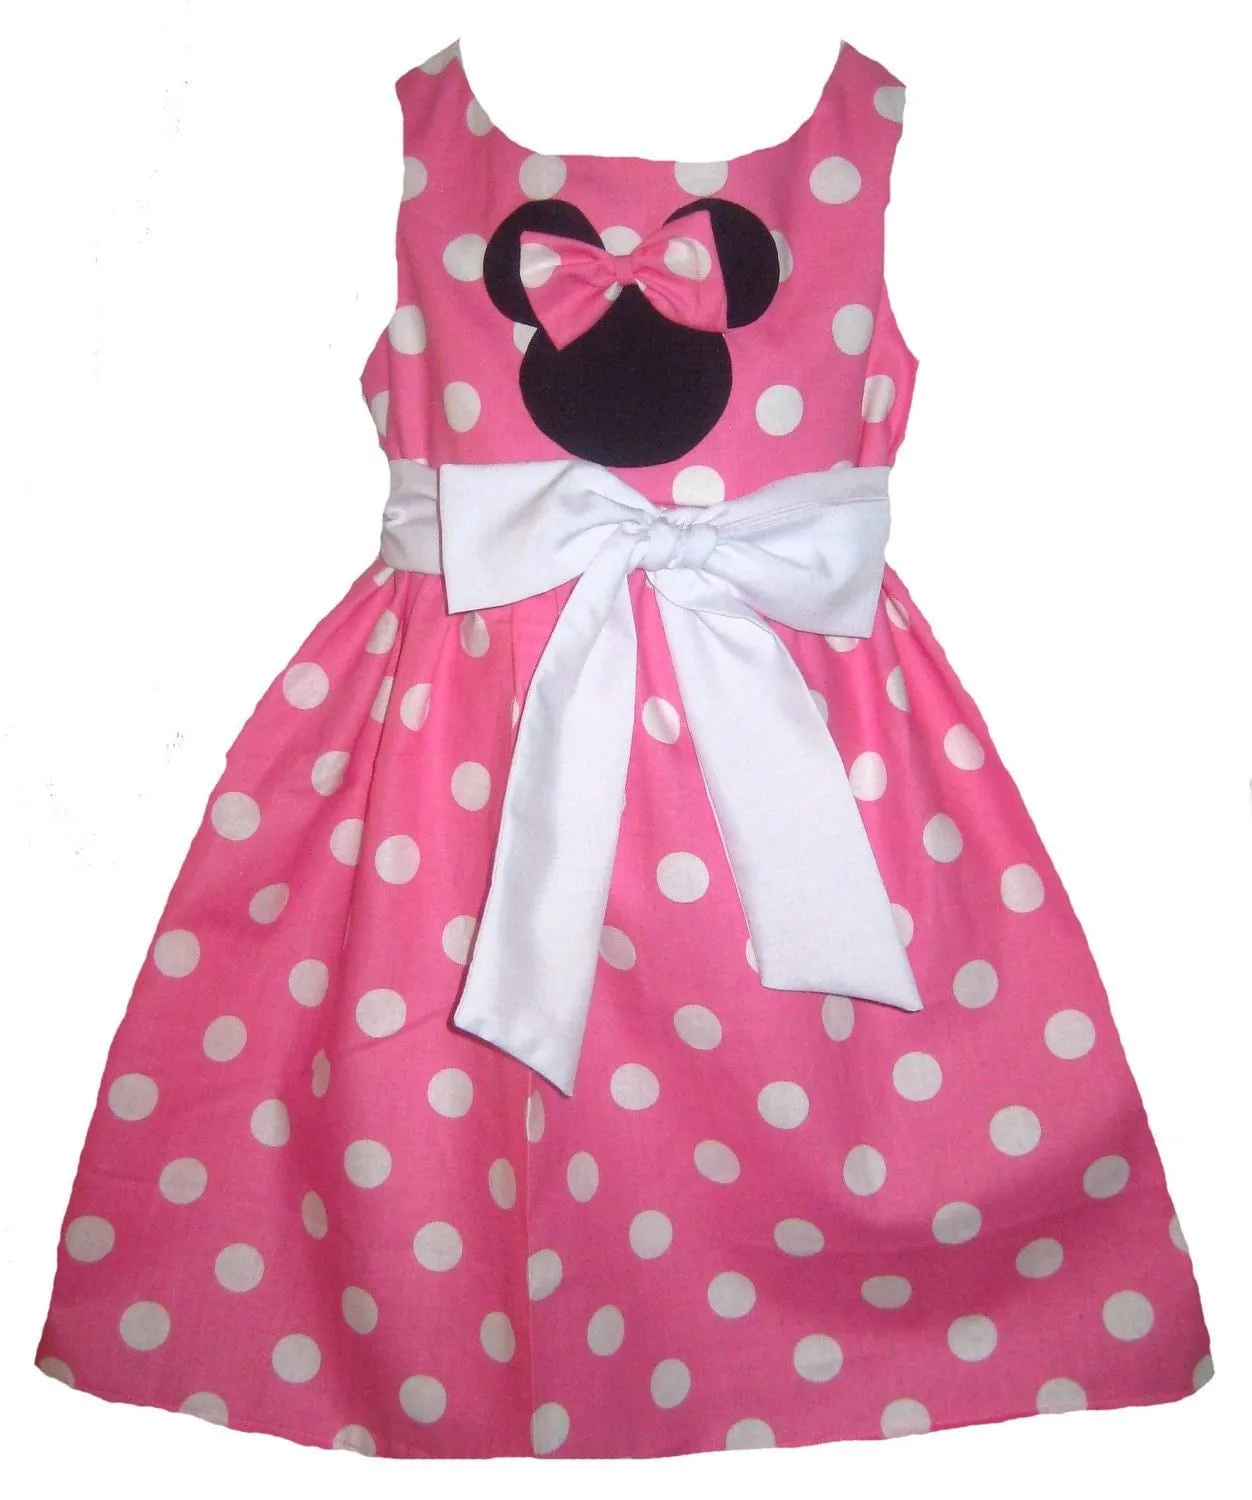 Popular items for minnie mouse pink on Etsy